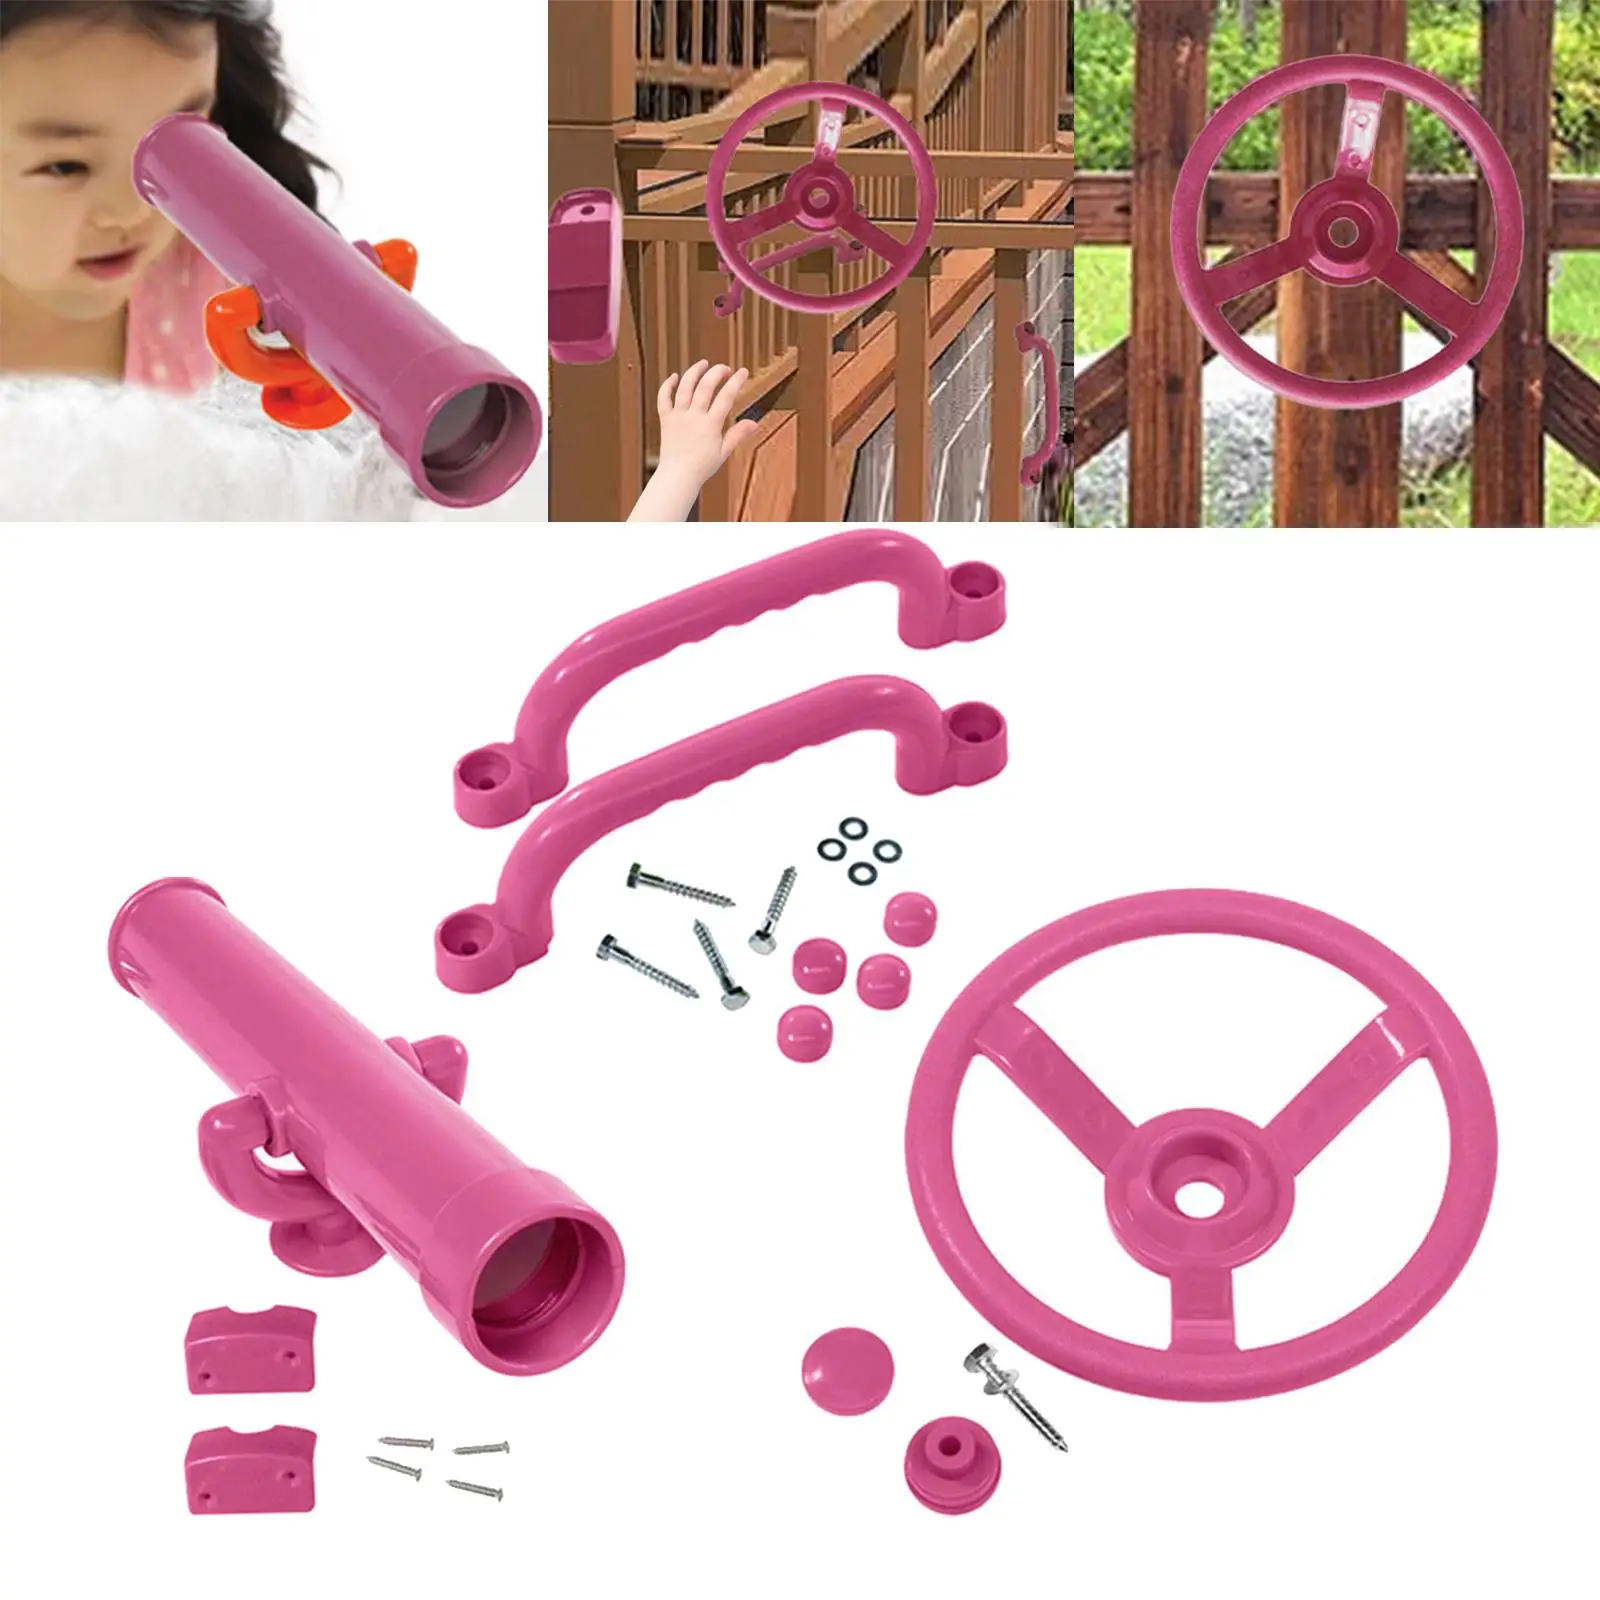 Playground Accessories Easy to Install Valentines Day Gifts for Kids for Swingset Treehouse Playhouse Climbing Frame Parts